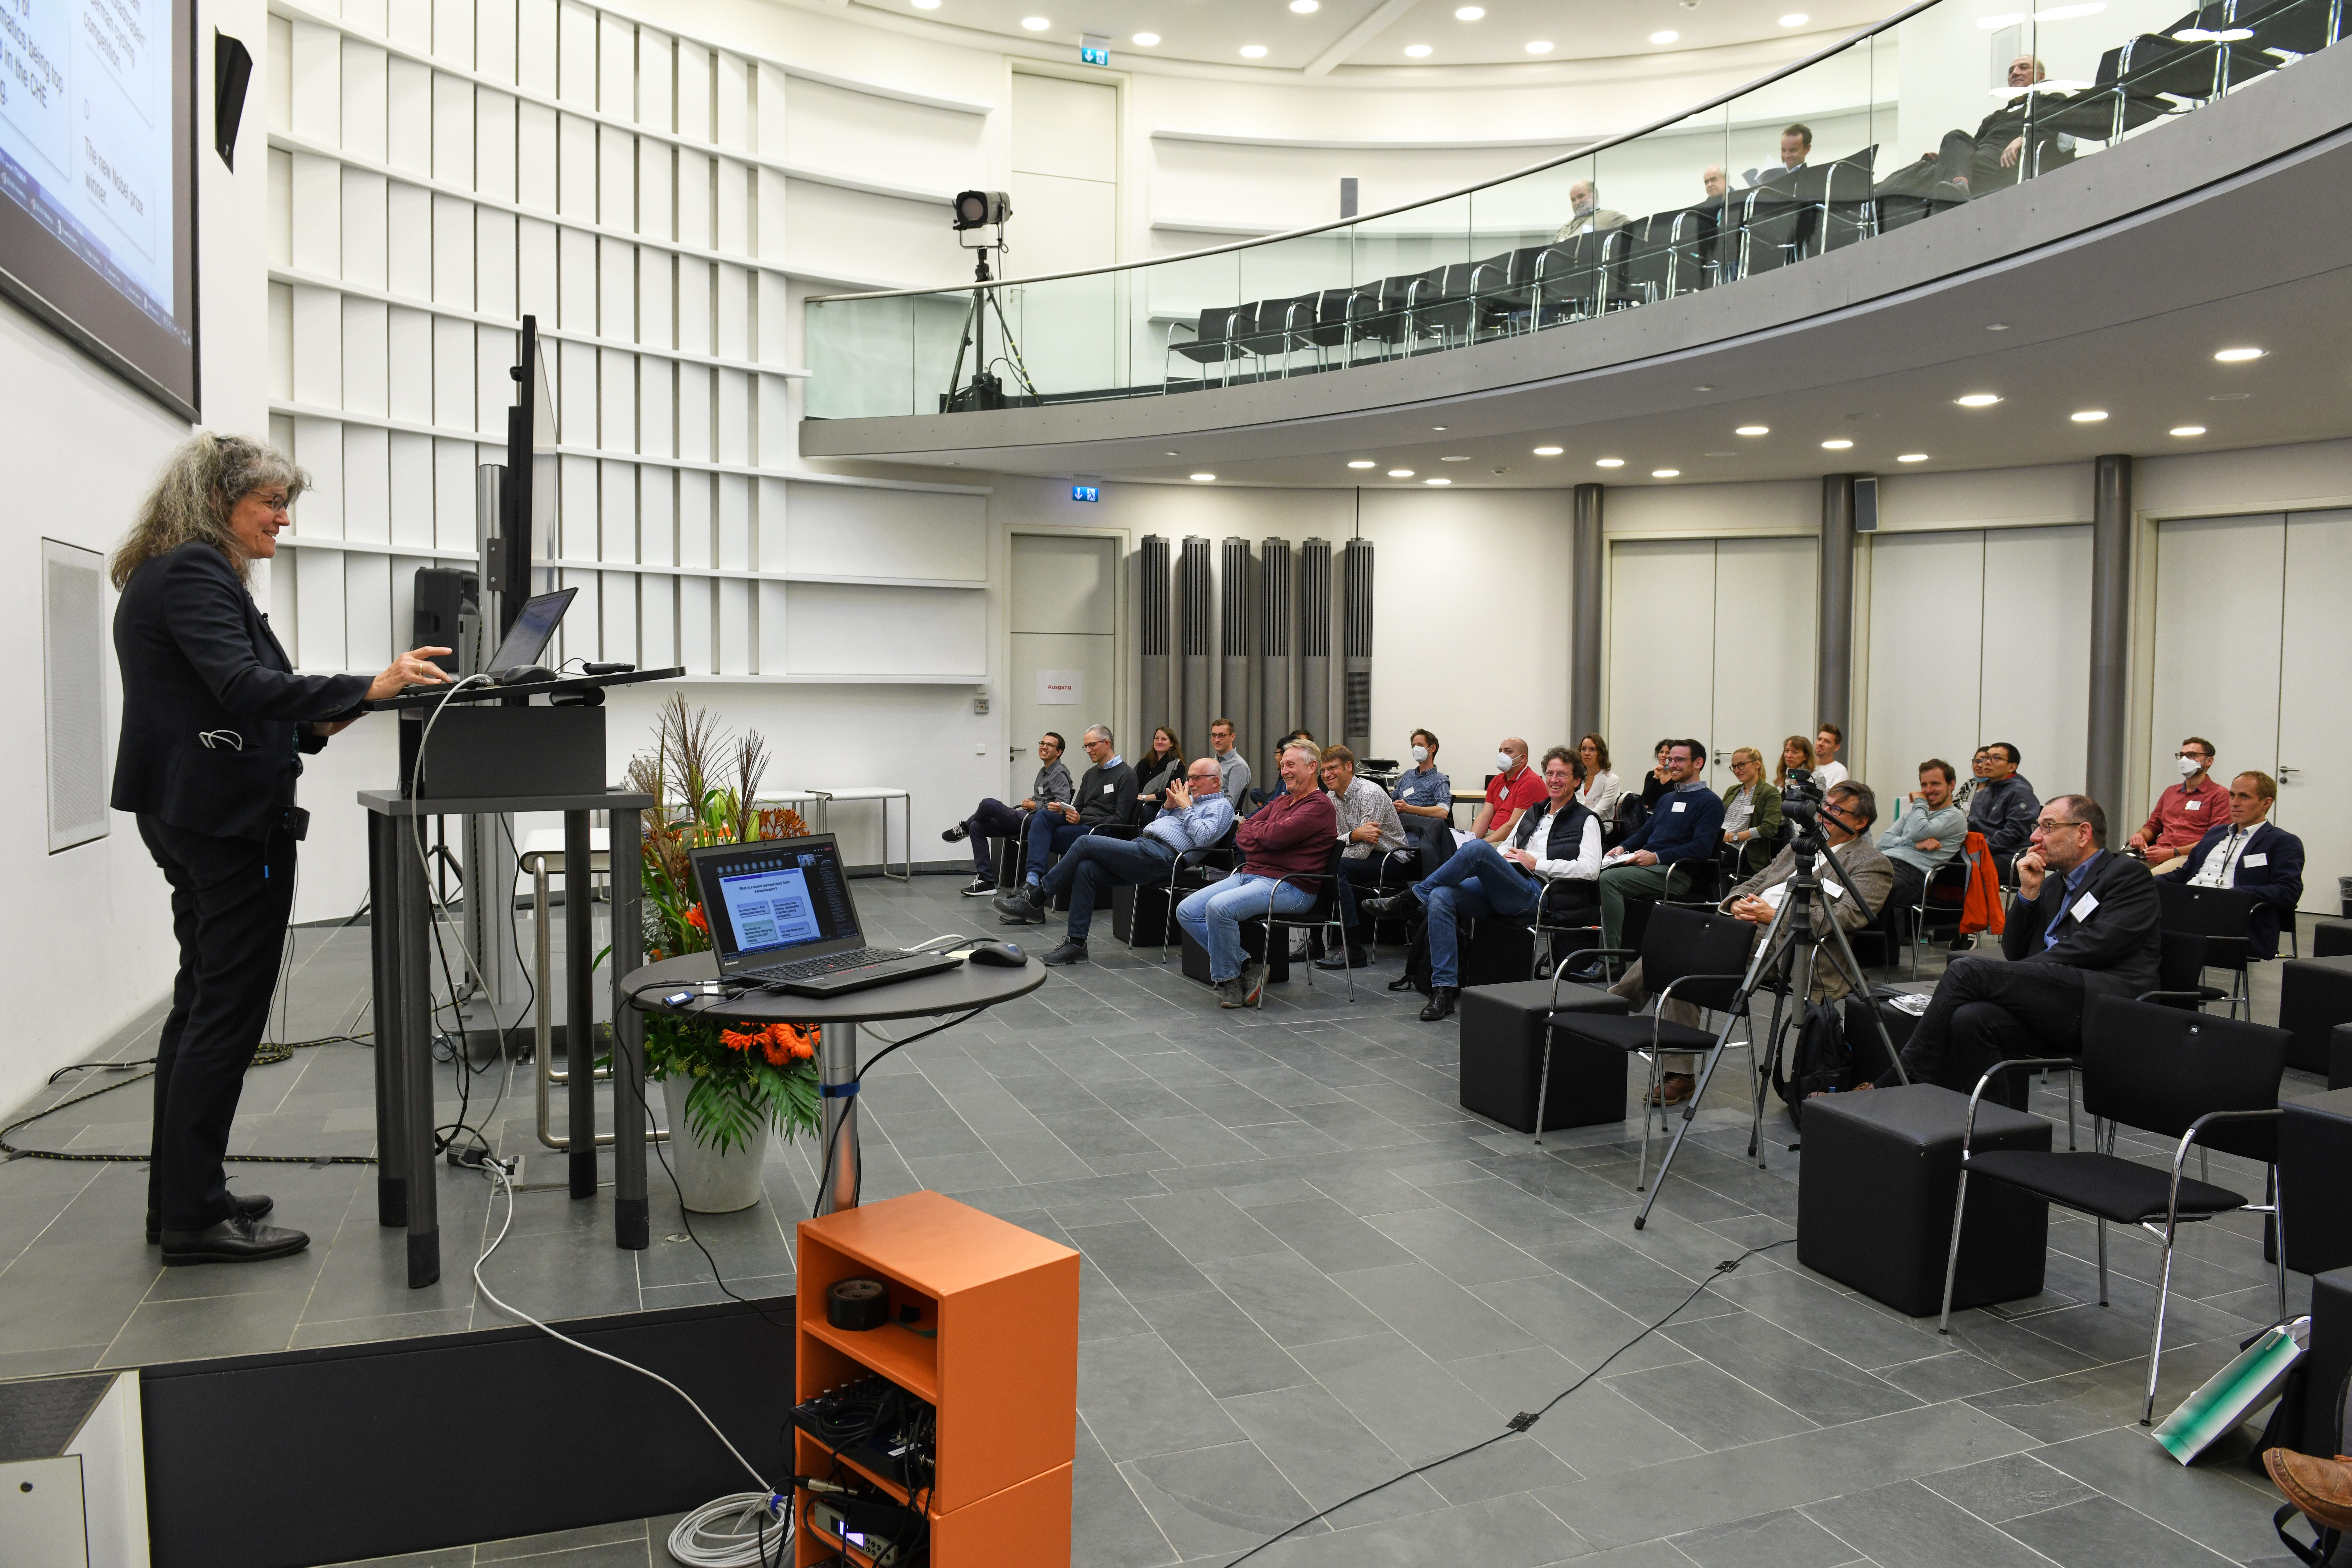 Opening of the event Prof. Dr. Anita Schöbel in the lecture hall of the Fraunhofer ITWM.